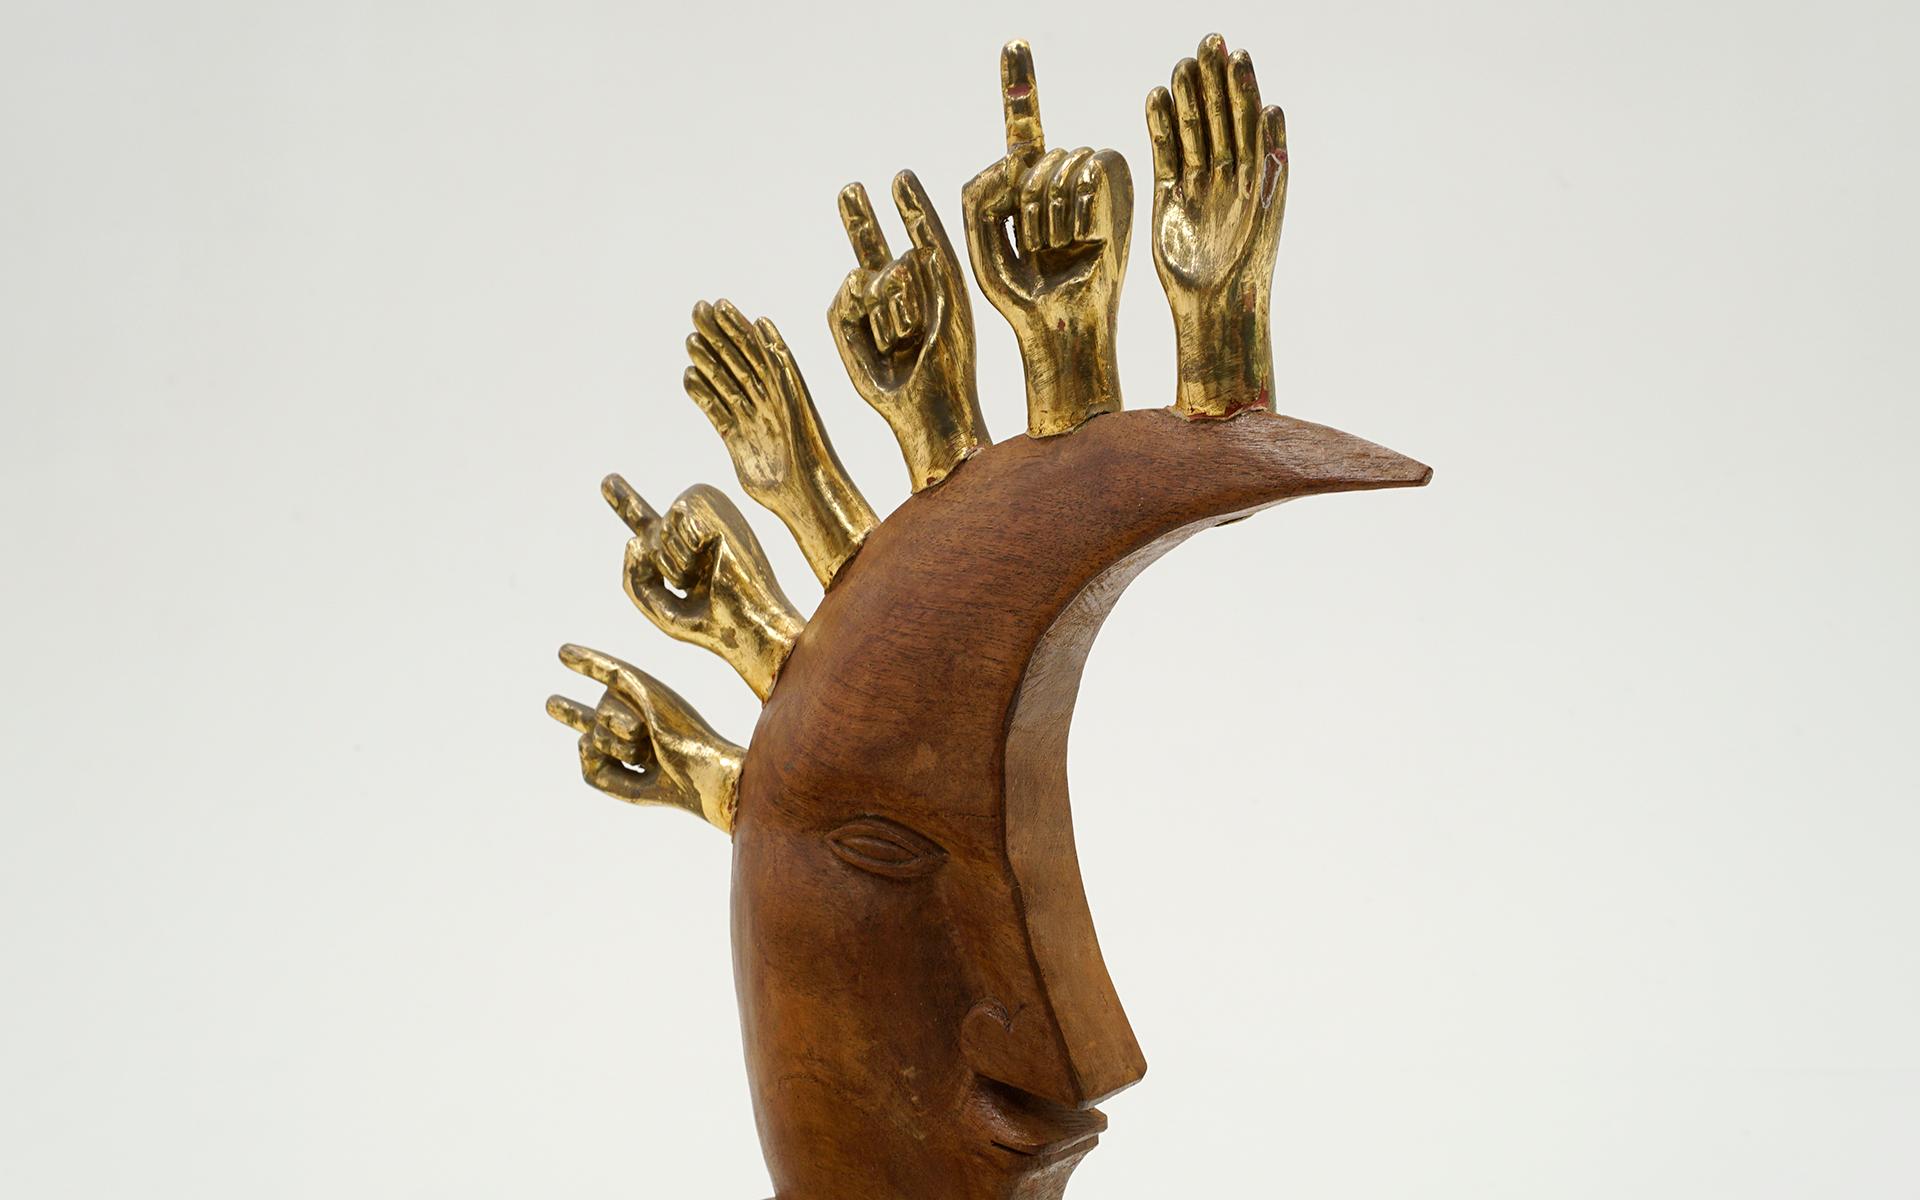 Walnut Pedro Friedeberg Moon Face with Hands Table Top Sculpture, 1970s, Signed. For Sale